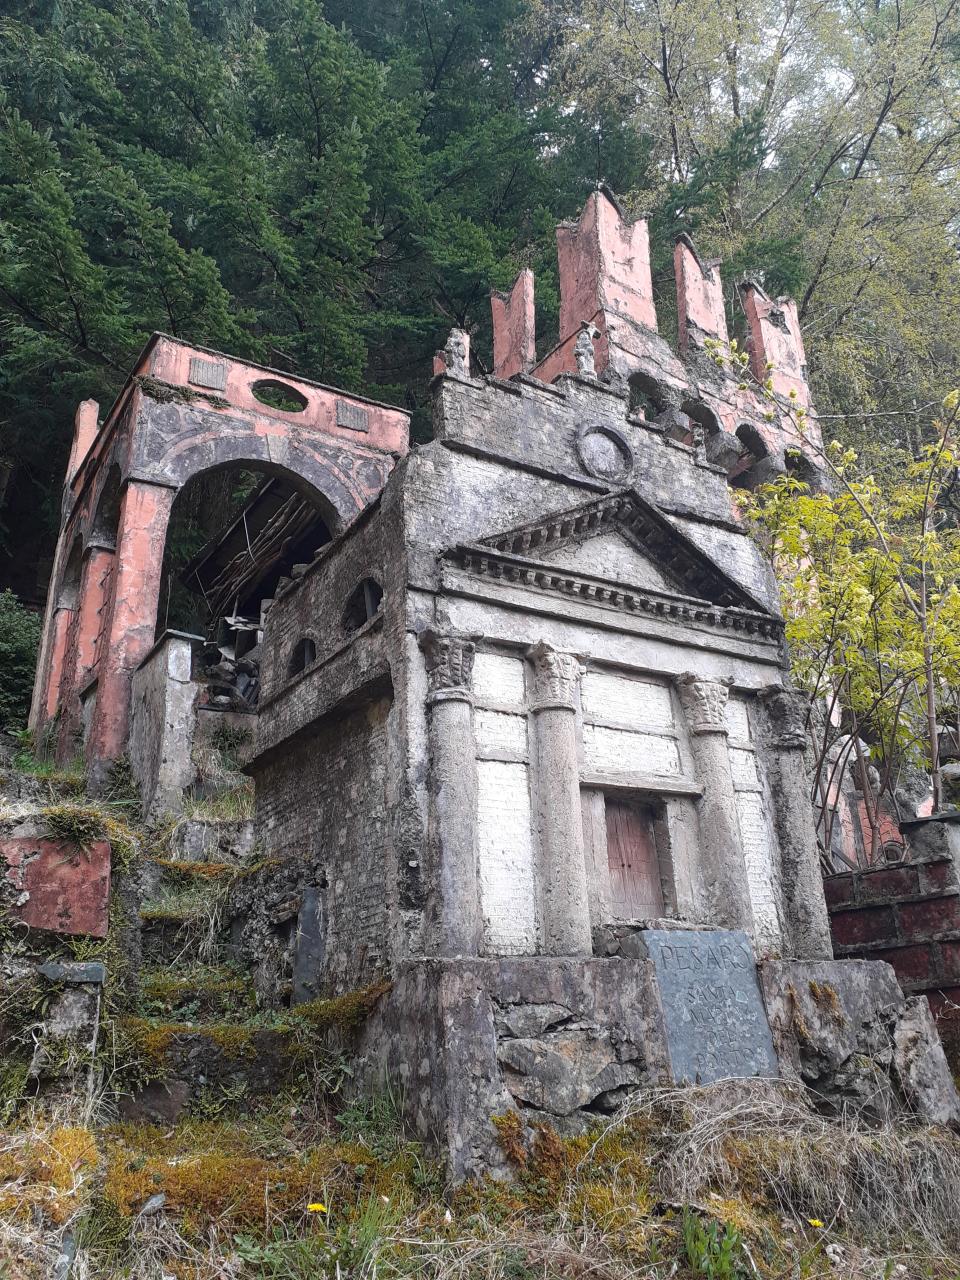 Ruined temples are concealed in the undergrowth